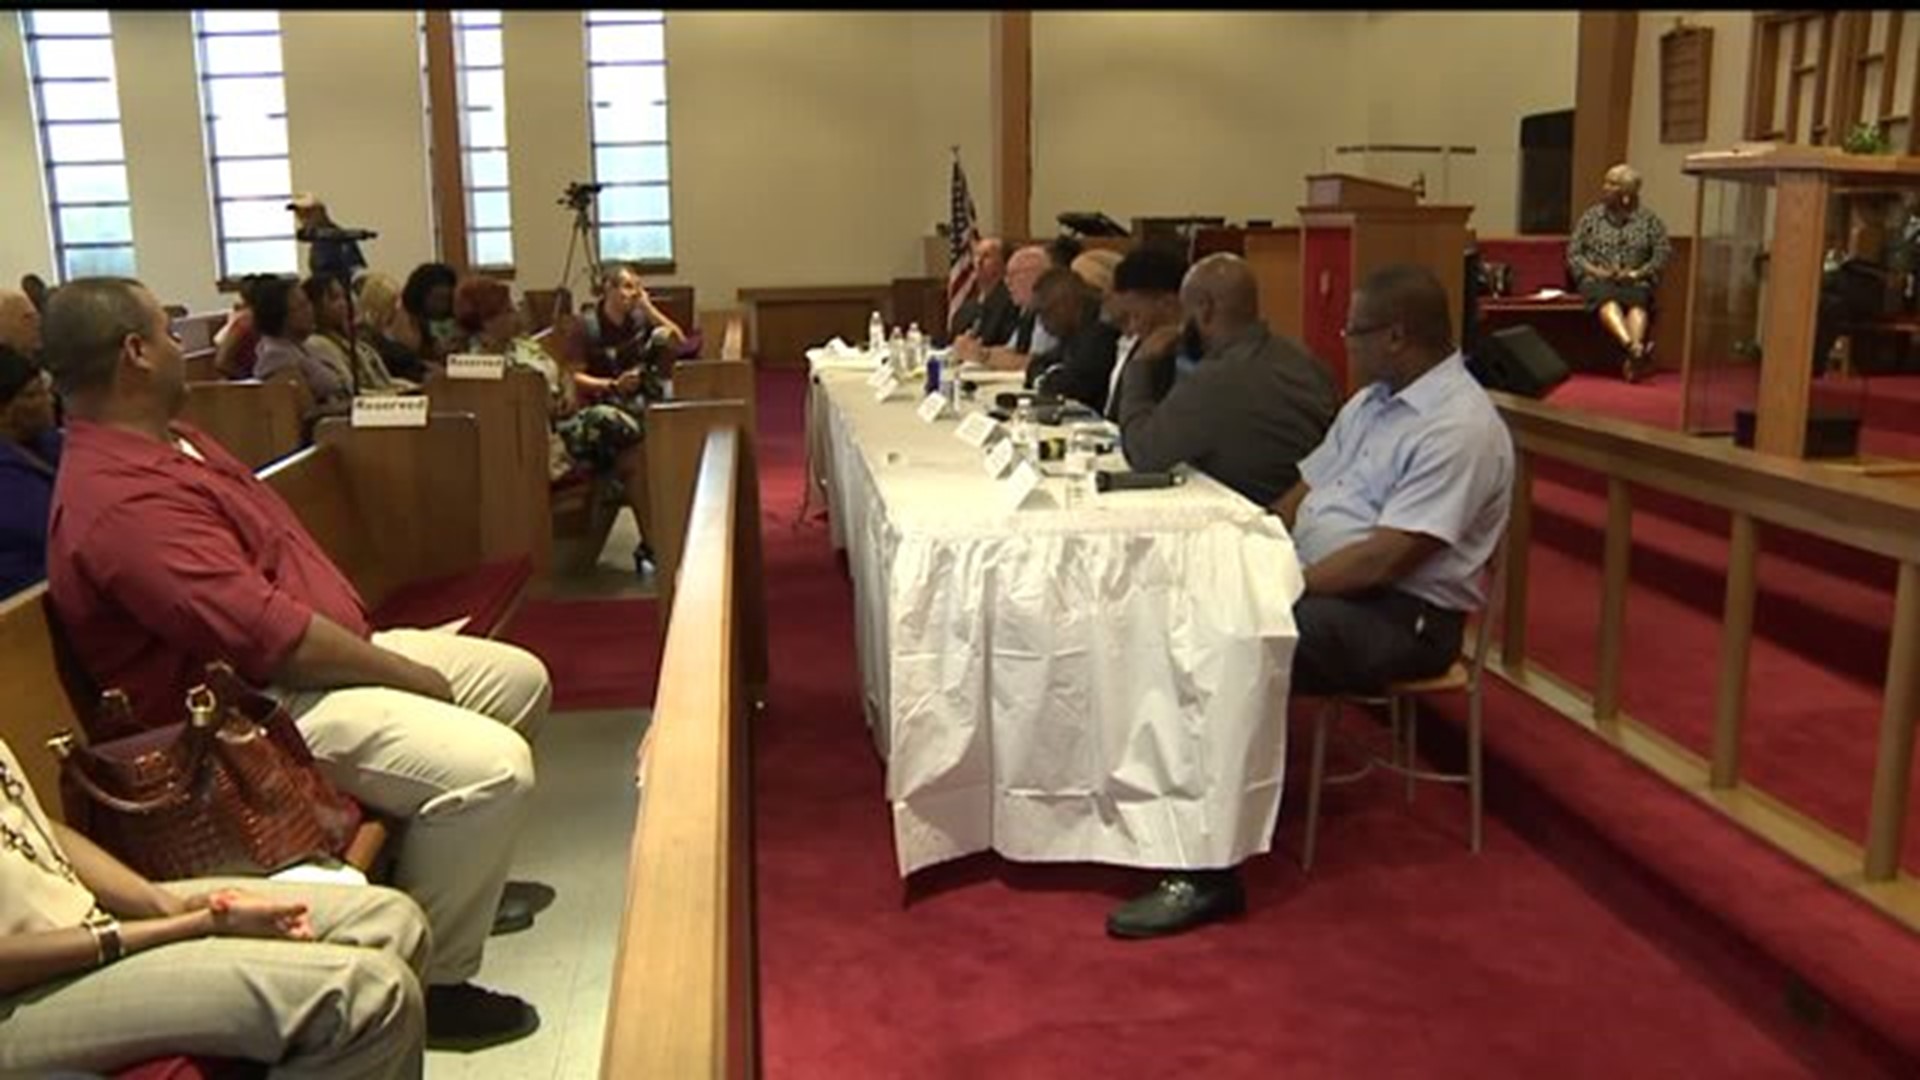 Community members in York discuss how to stop violence